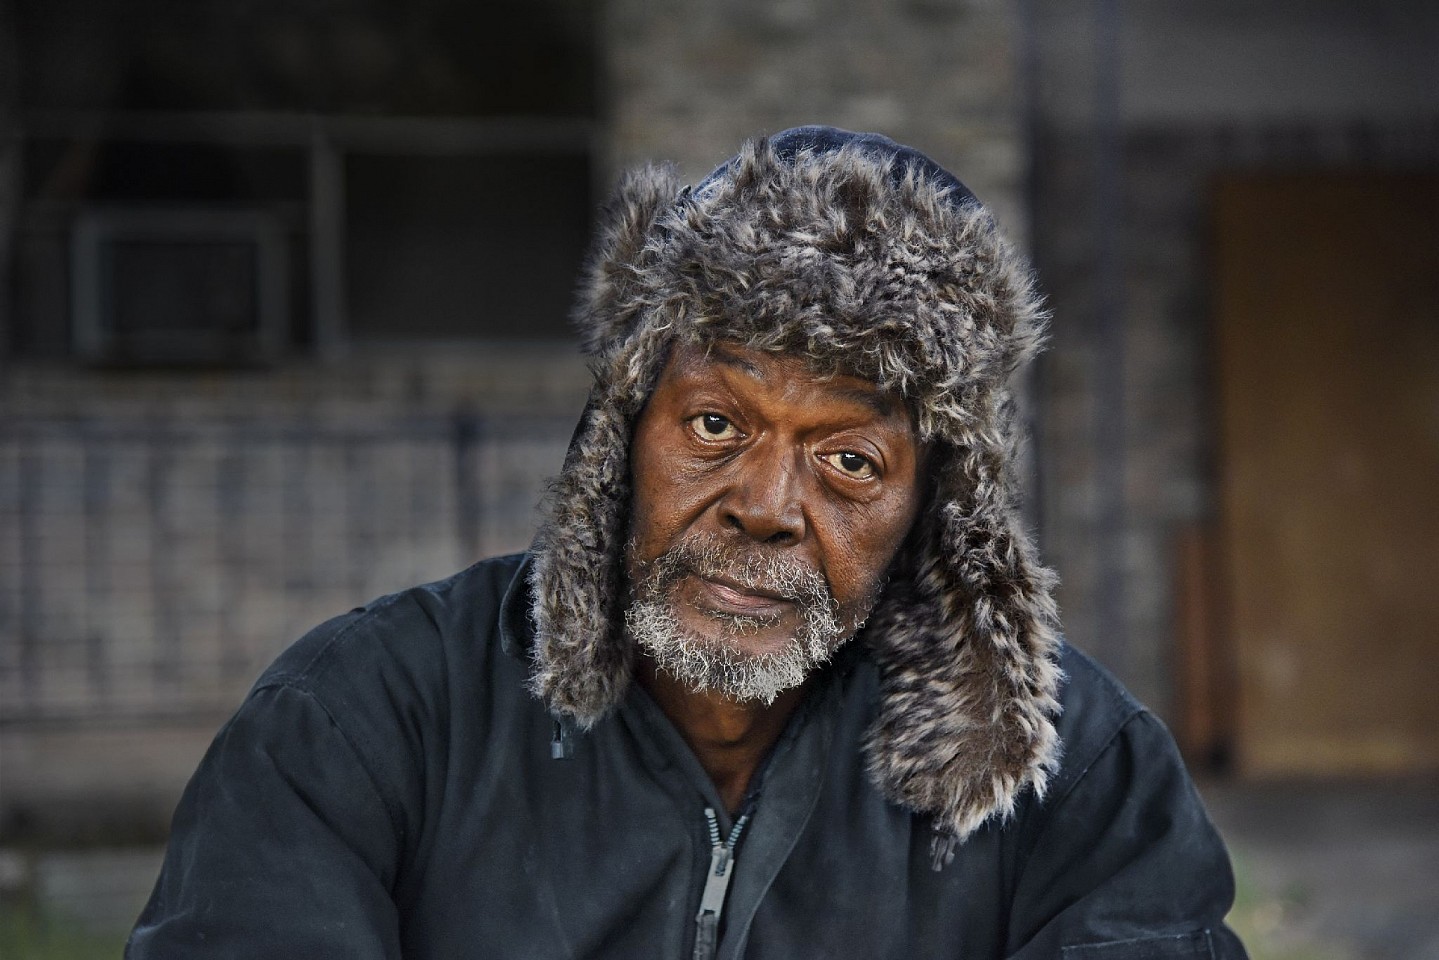 Steve McCurry, Man in Fur Hat, 2014
FujiFlex Crystal Archive Print
Price/Size on request